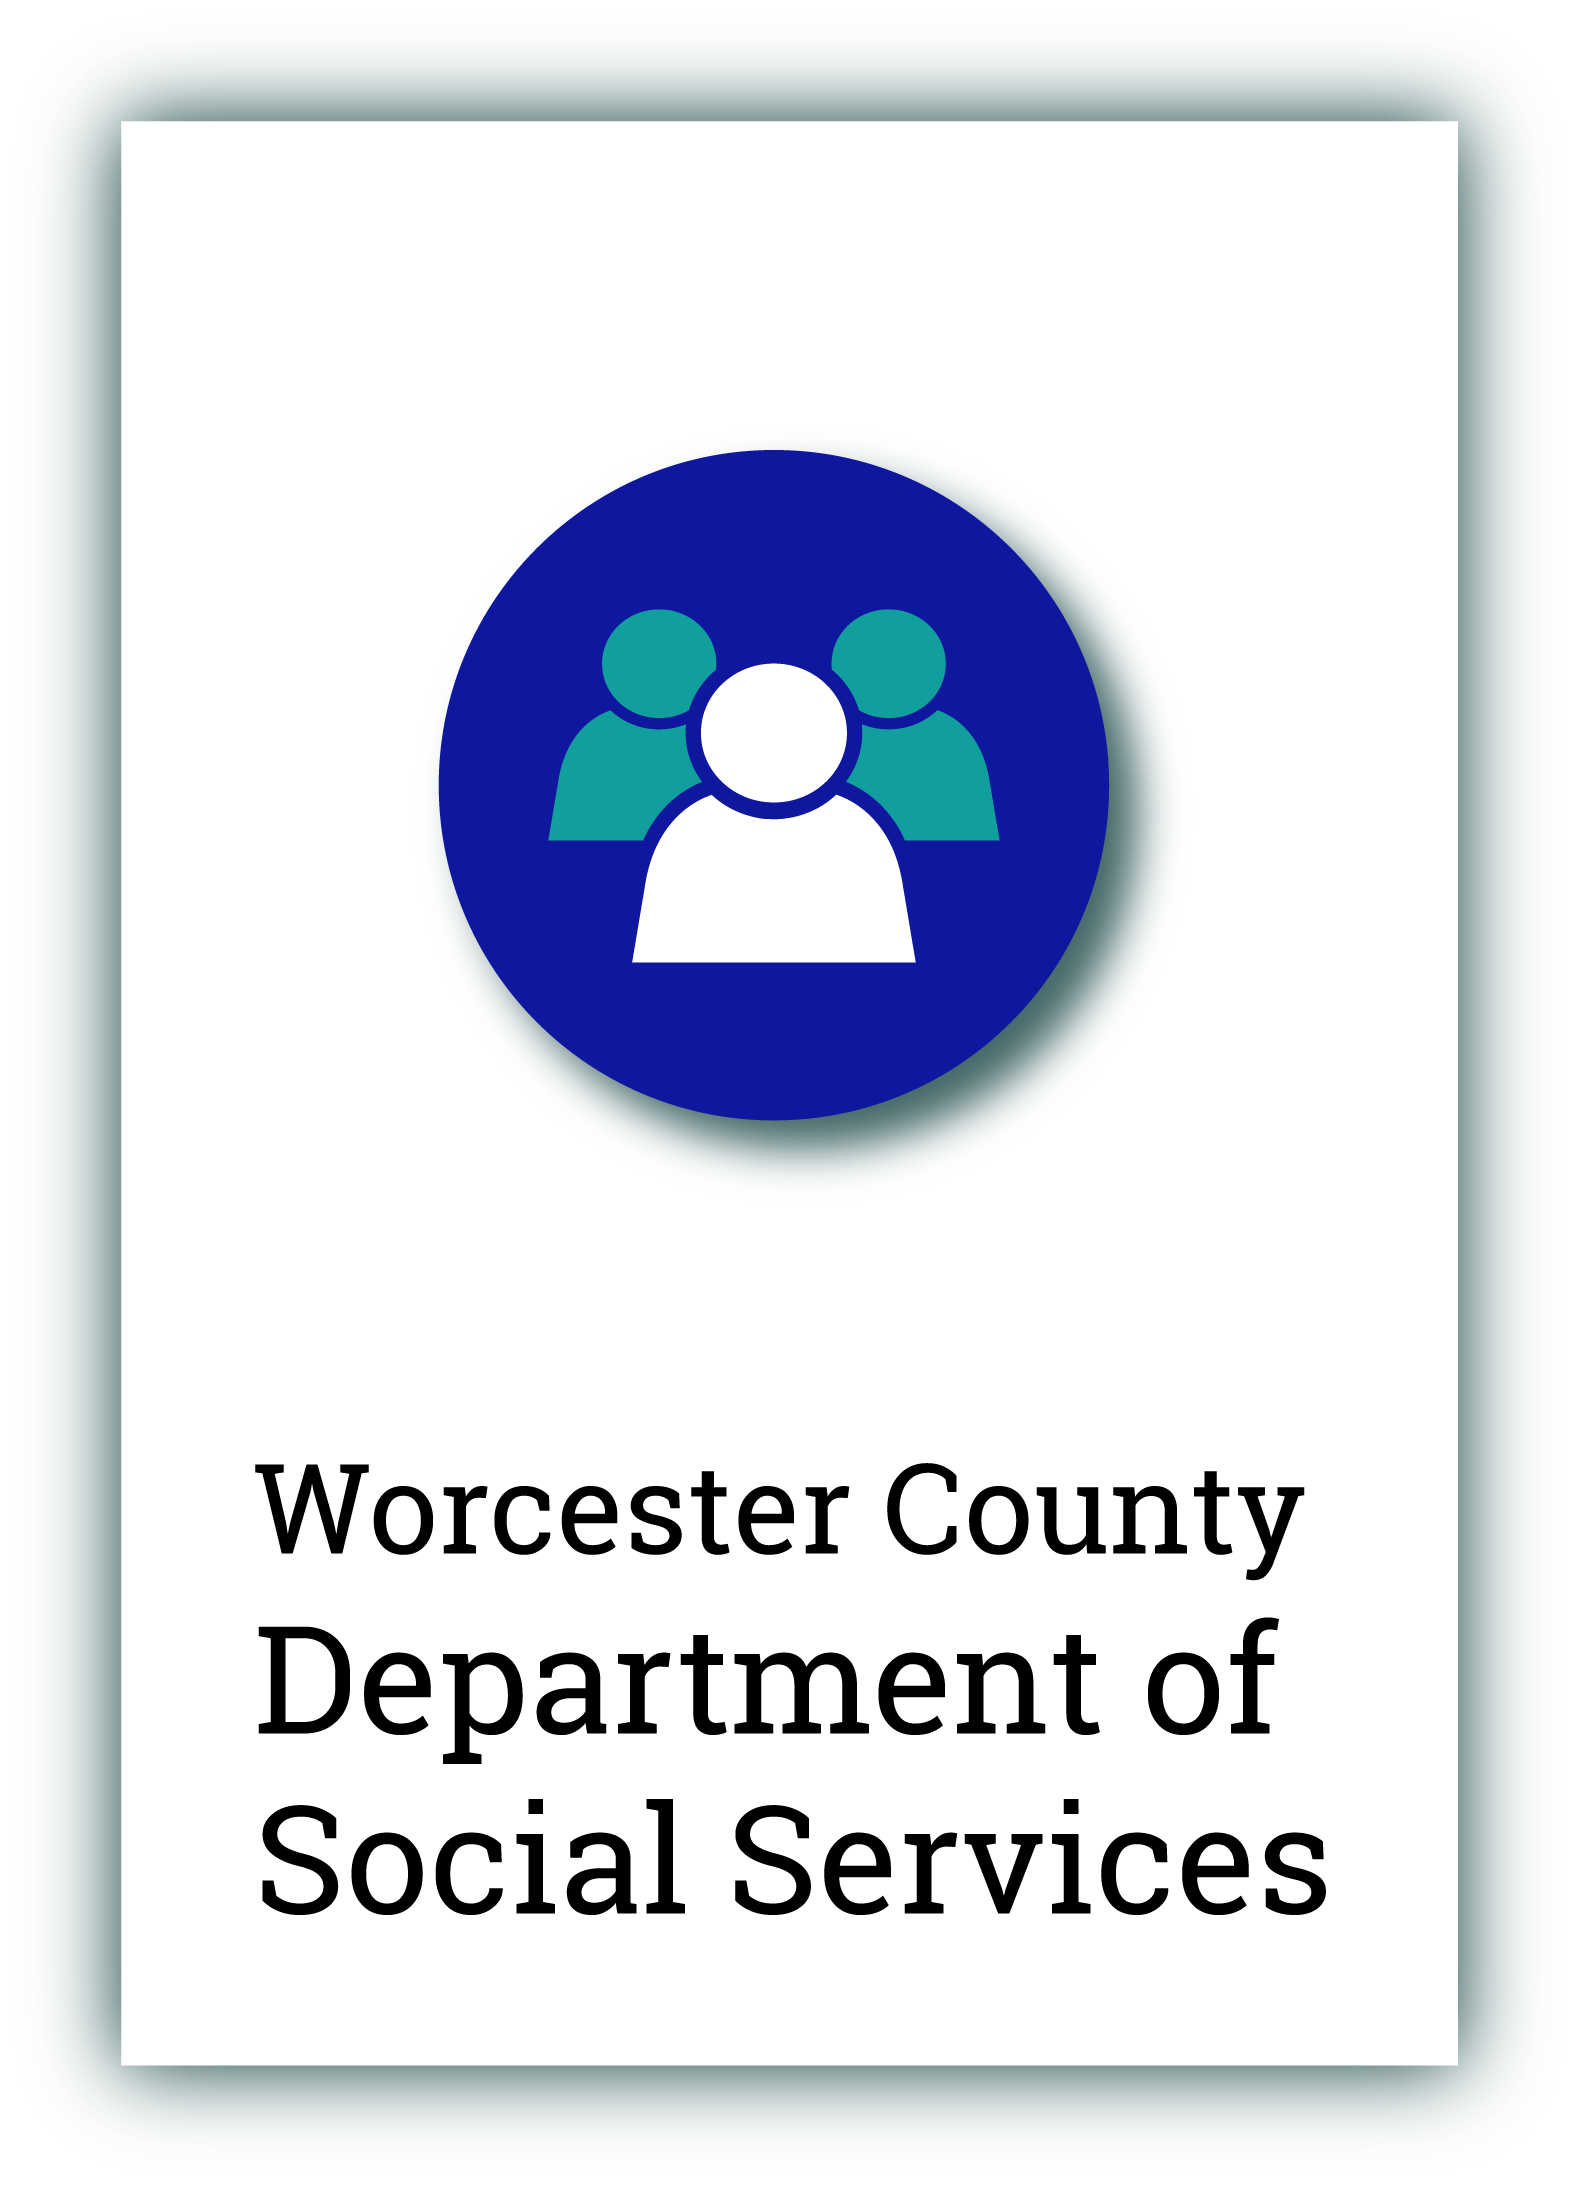 Worcester County Department of Social Services